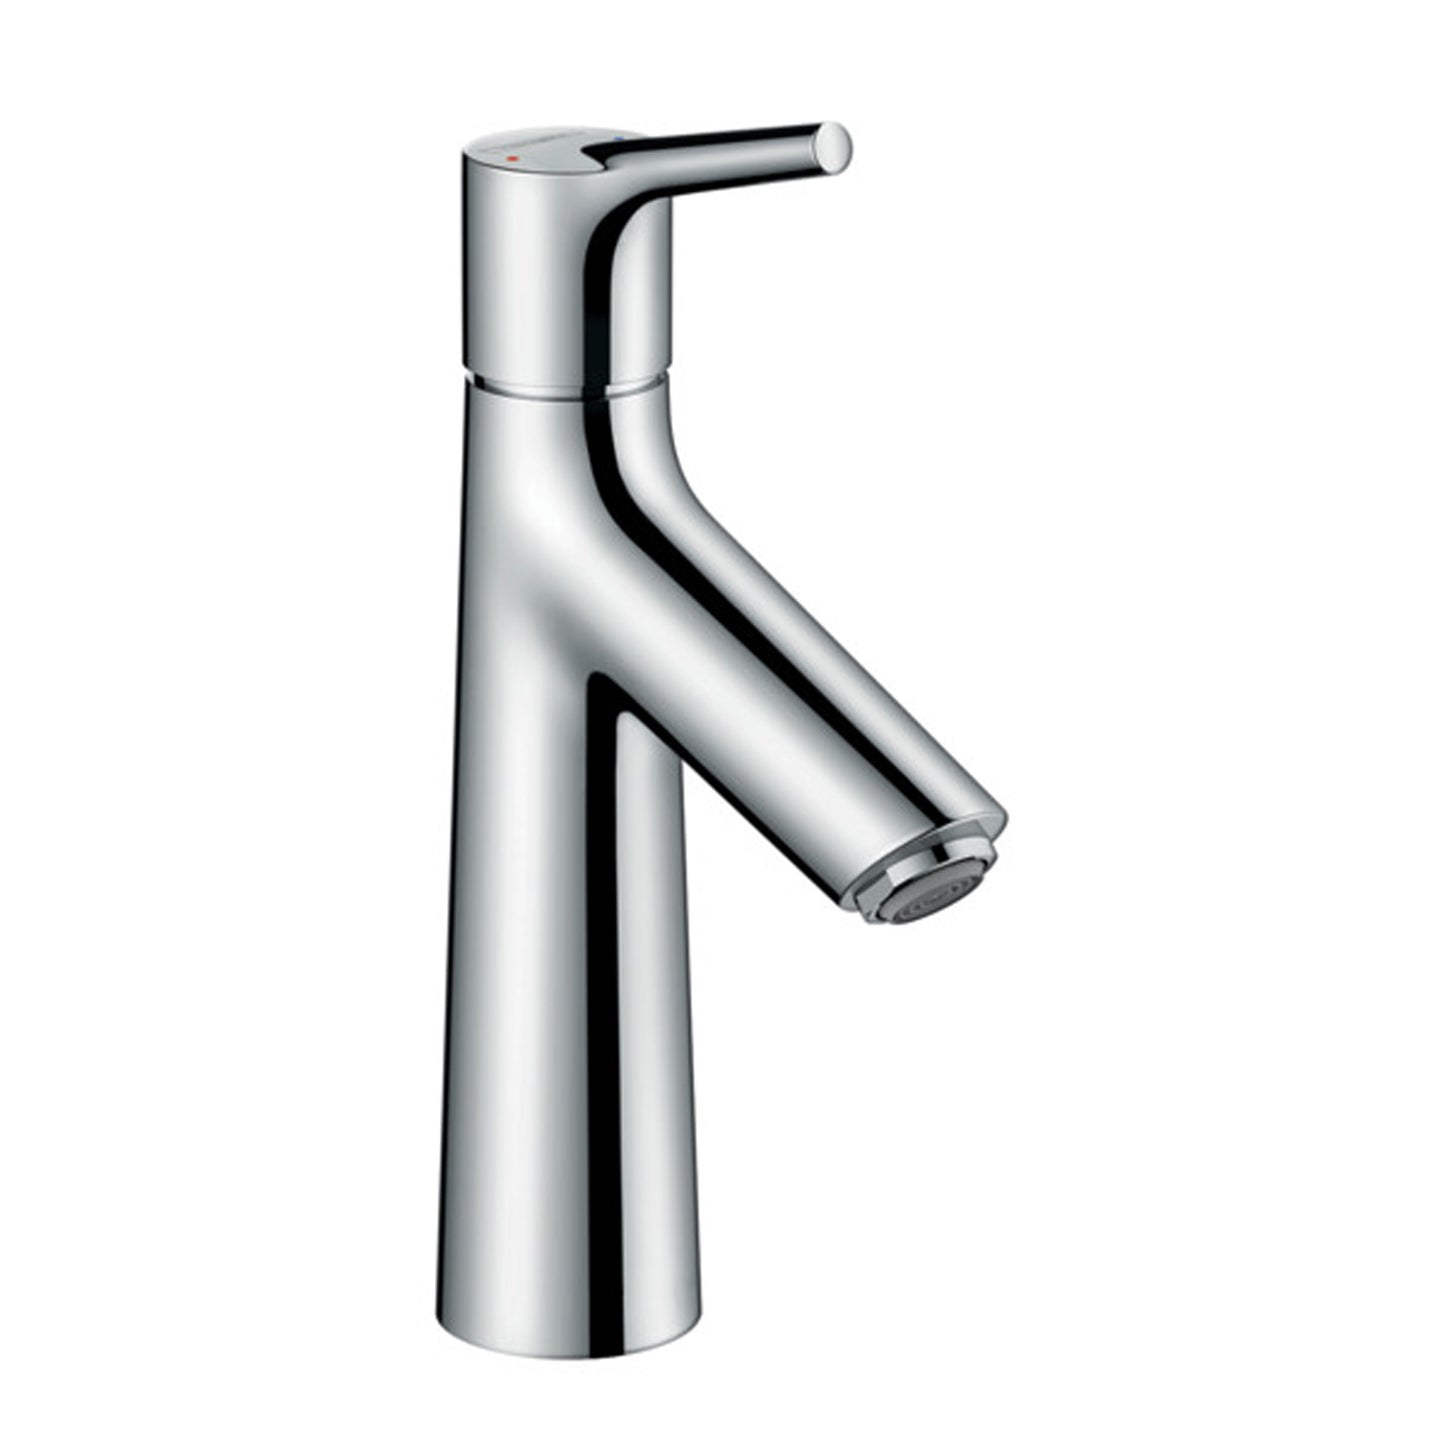 Hansgrohe Talis S Basin mixer 110 with pull rod waste set 72020.000